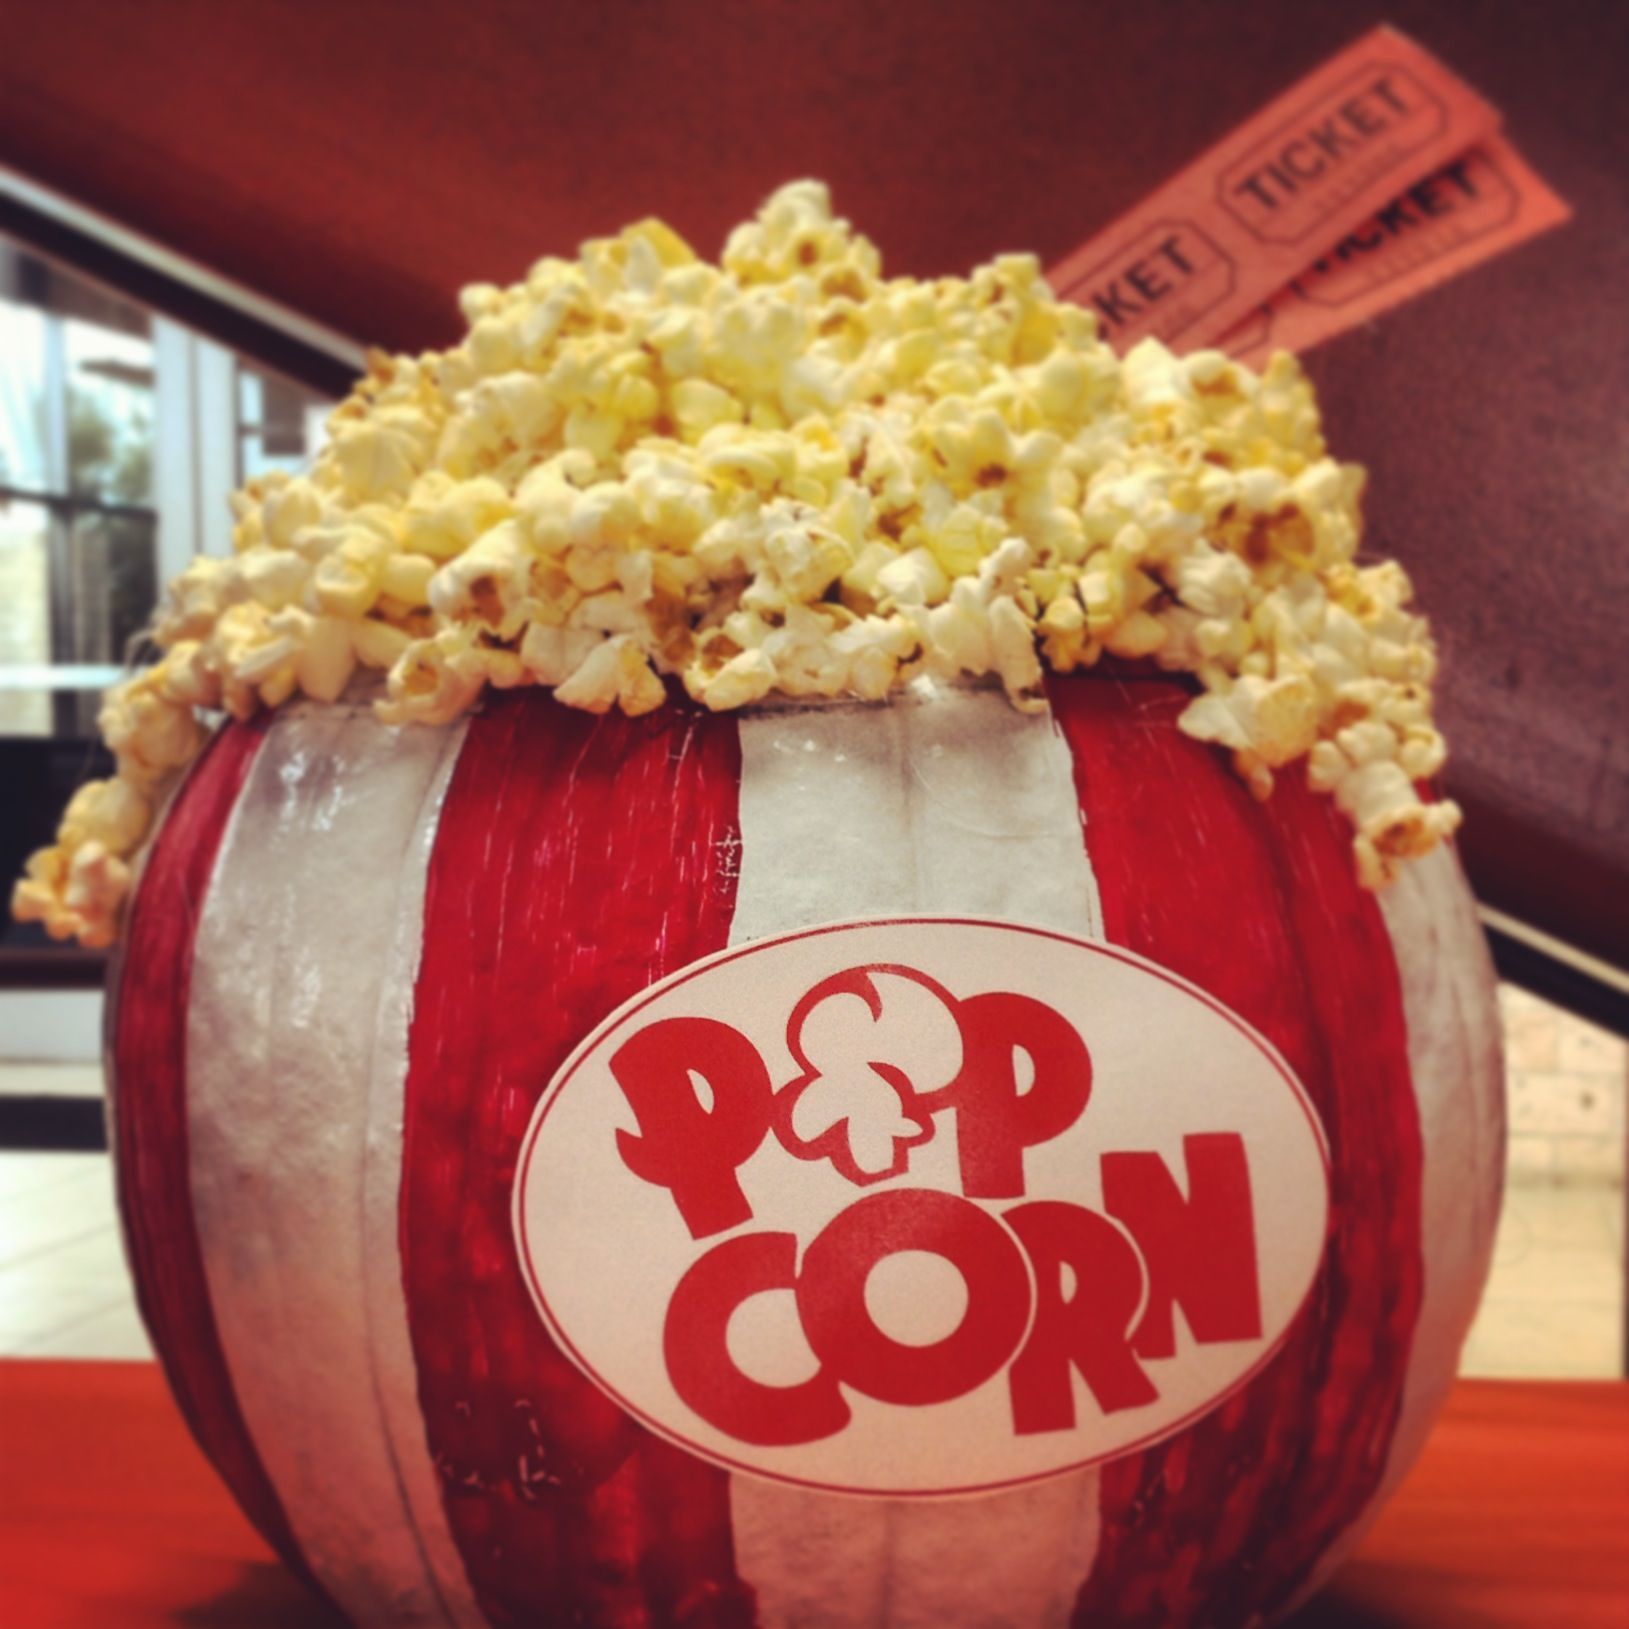 For the ones who love movies and popcorn!